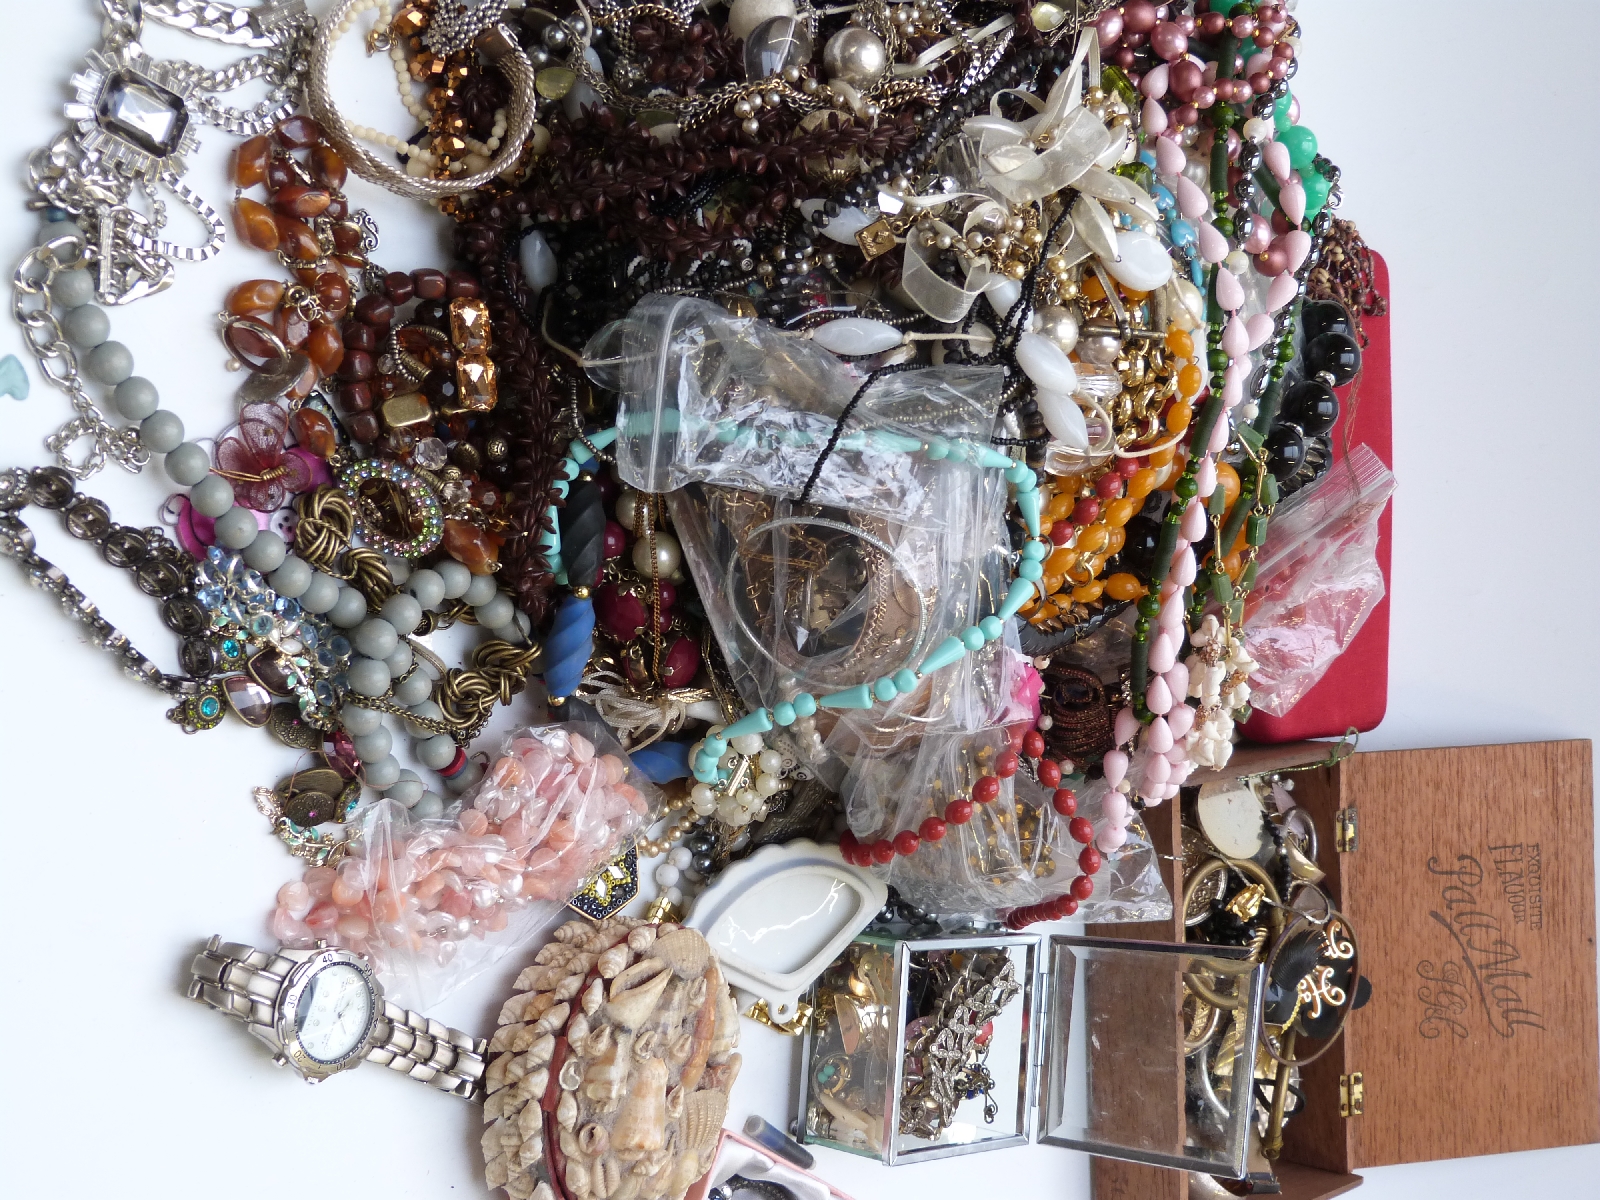 A collection of jewellery including necklaces, brooches, earrings etc